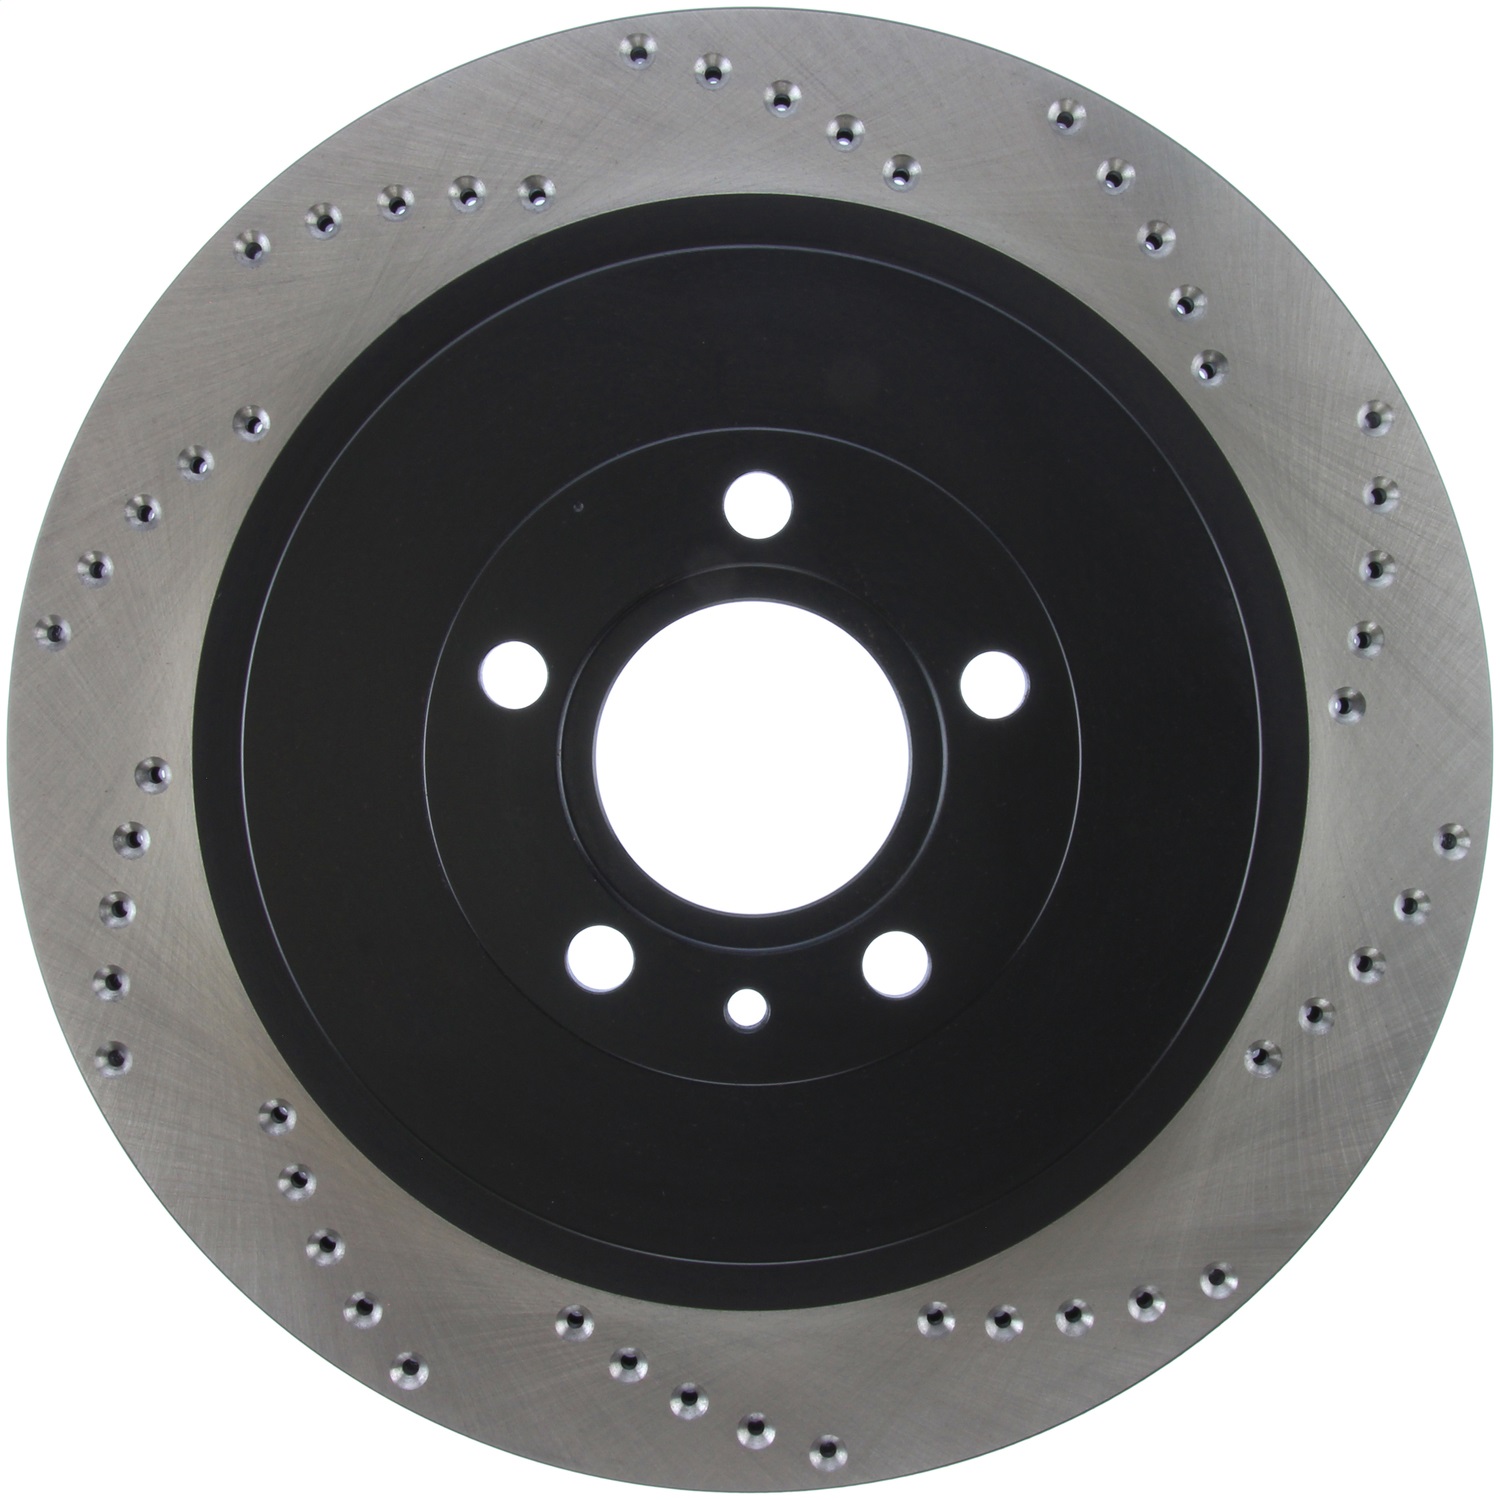 StopTech 128.61105L Sport Cross-Drilled Disc Brake Rotor Fits 13-14 Mustang